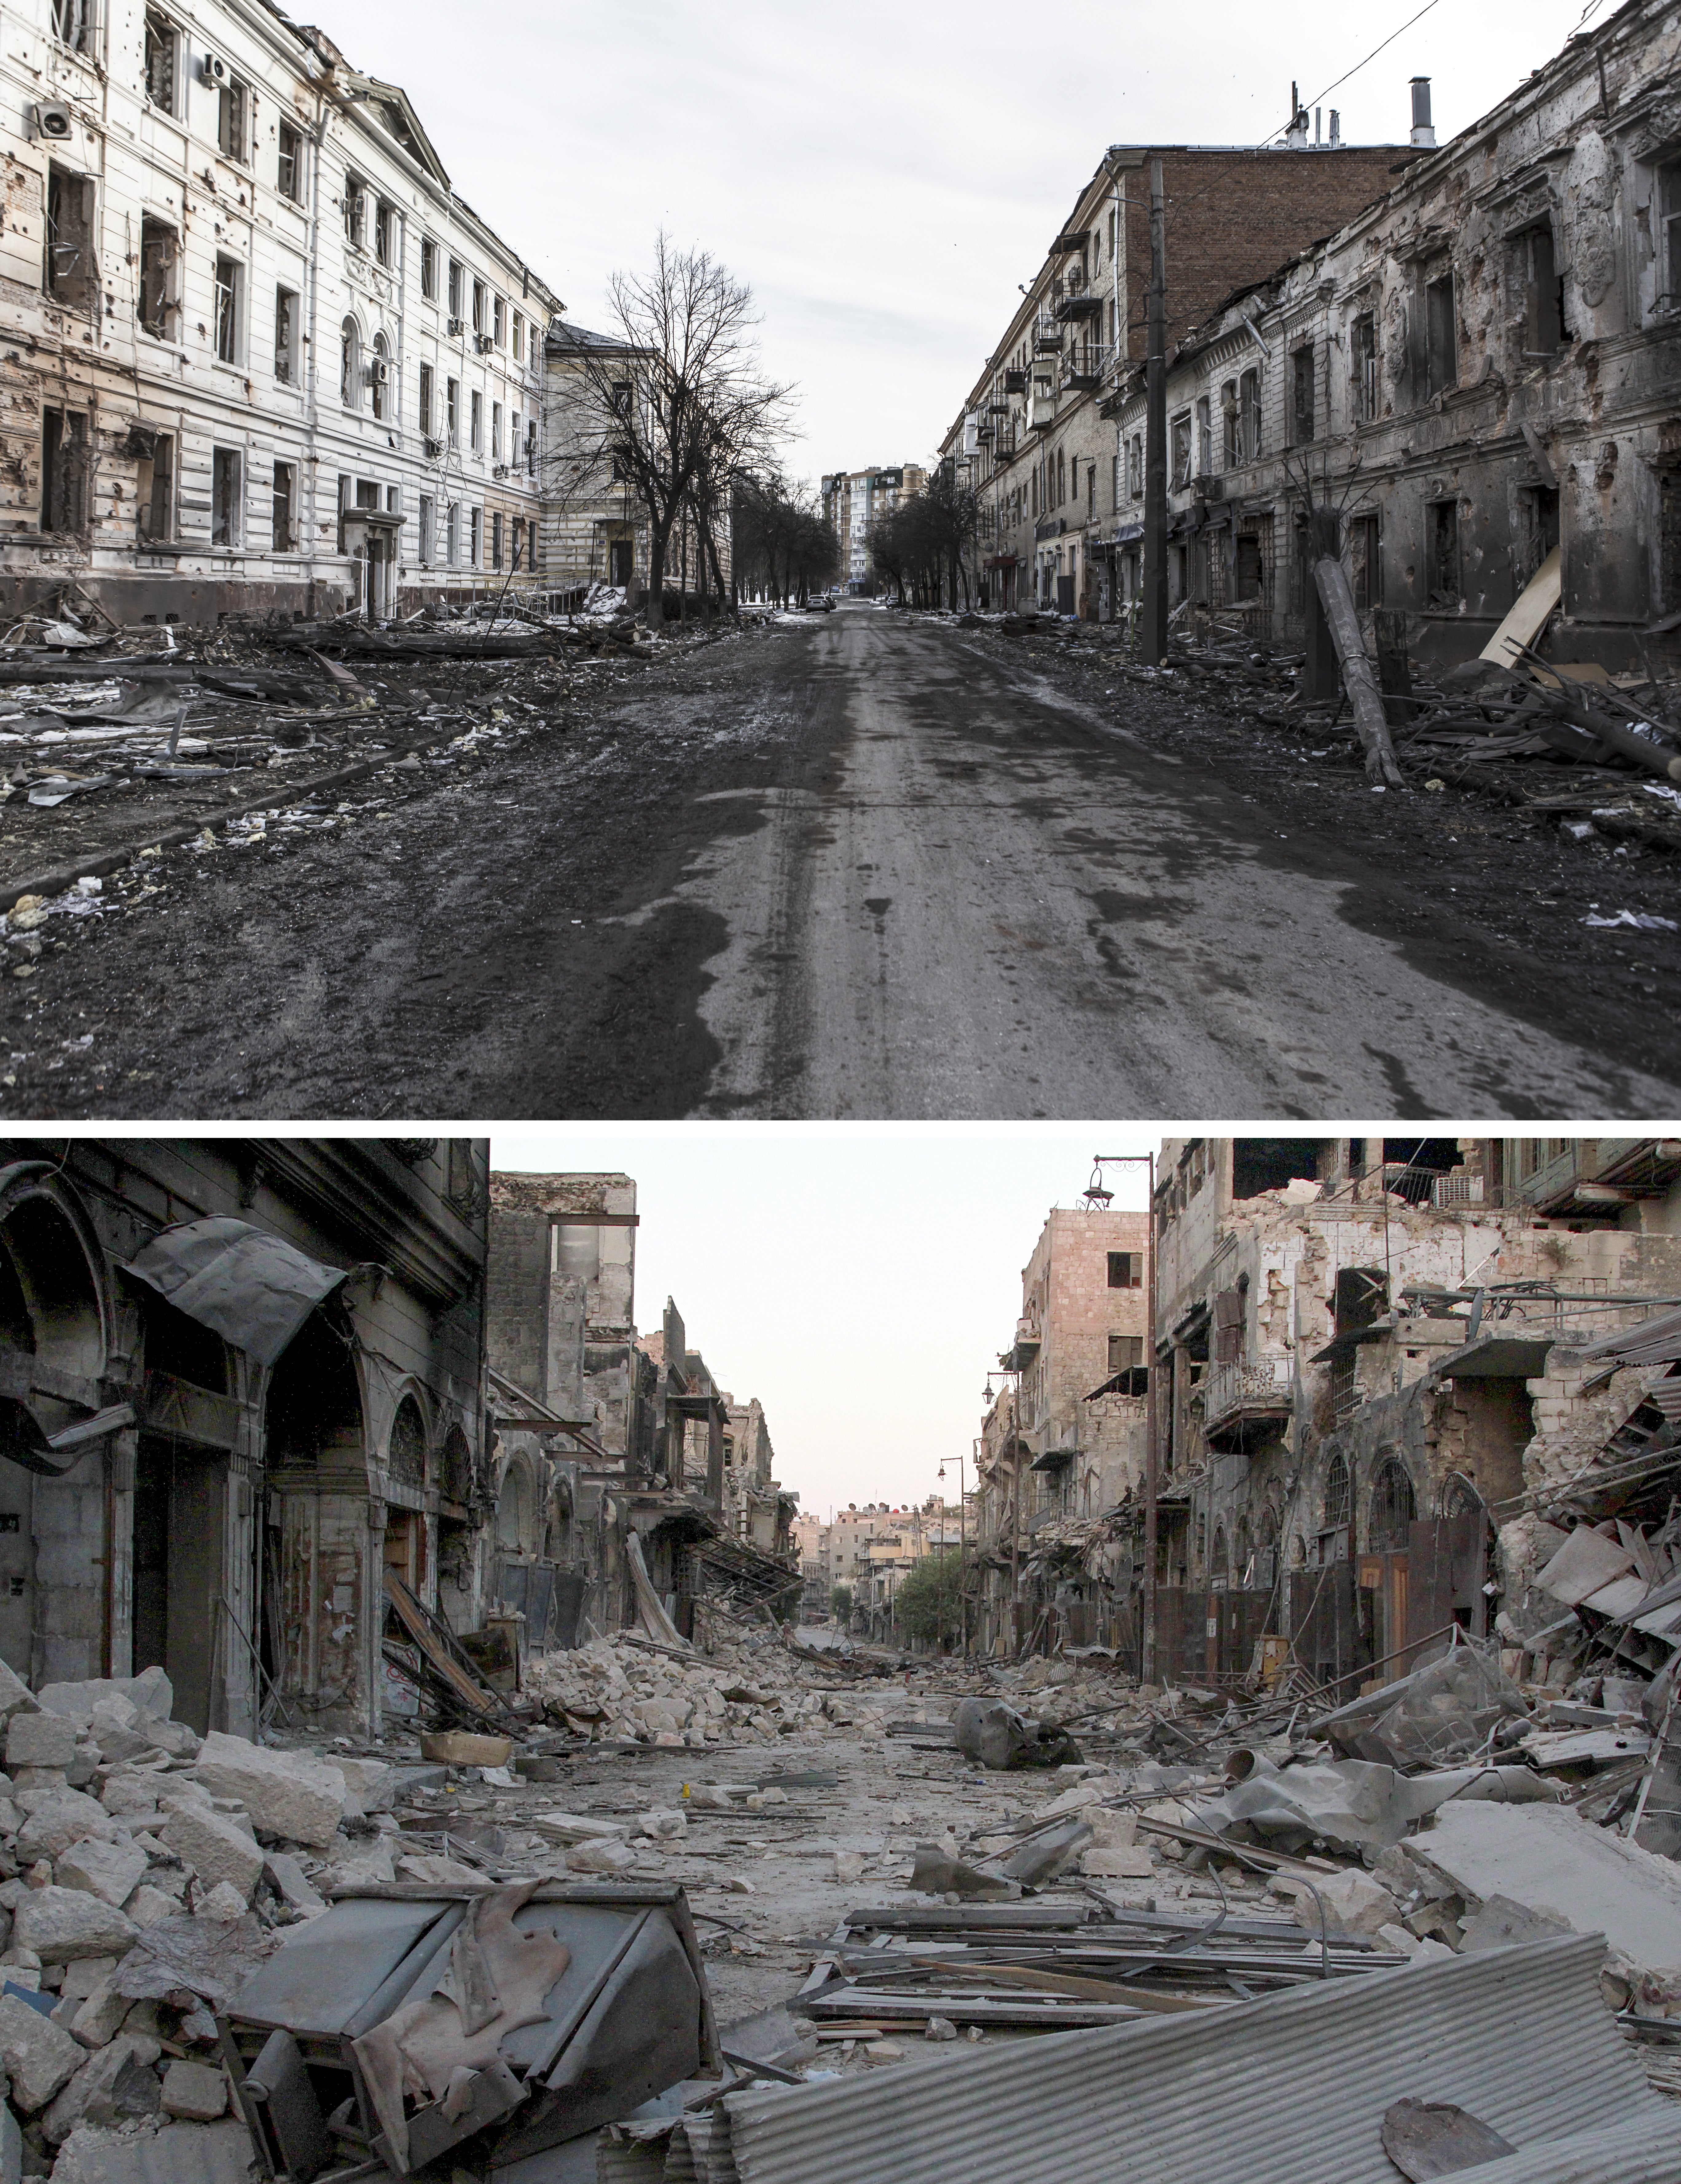 Photos emerging during Russia’s attacks on Ukraine bear similarities with the images taken during the Syrian Civil War. A photo dated on March 12, 2022 (top) shows destruction in the districts of the city that were the subject of the bombings and which are located near the front in Kharkiv, Ukraine and a photo dated on August 10, 2014 shows debris of buildings after barrel bomb attack by helicopters in Aleppo